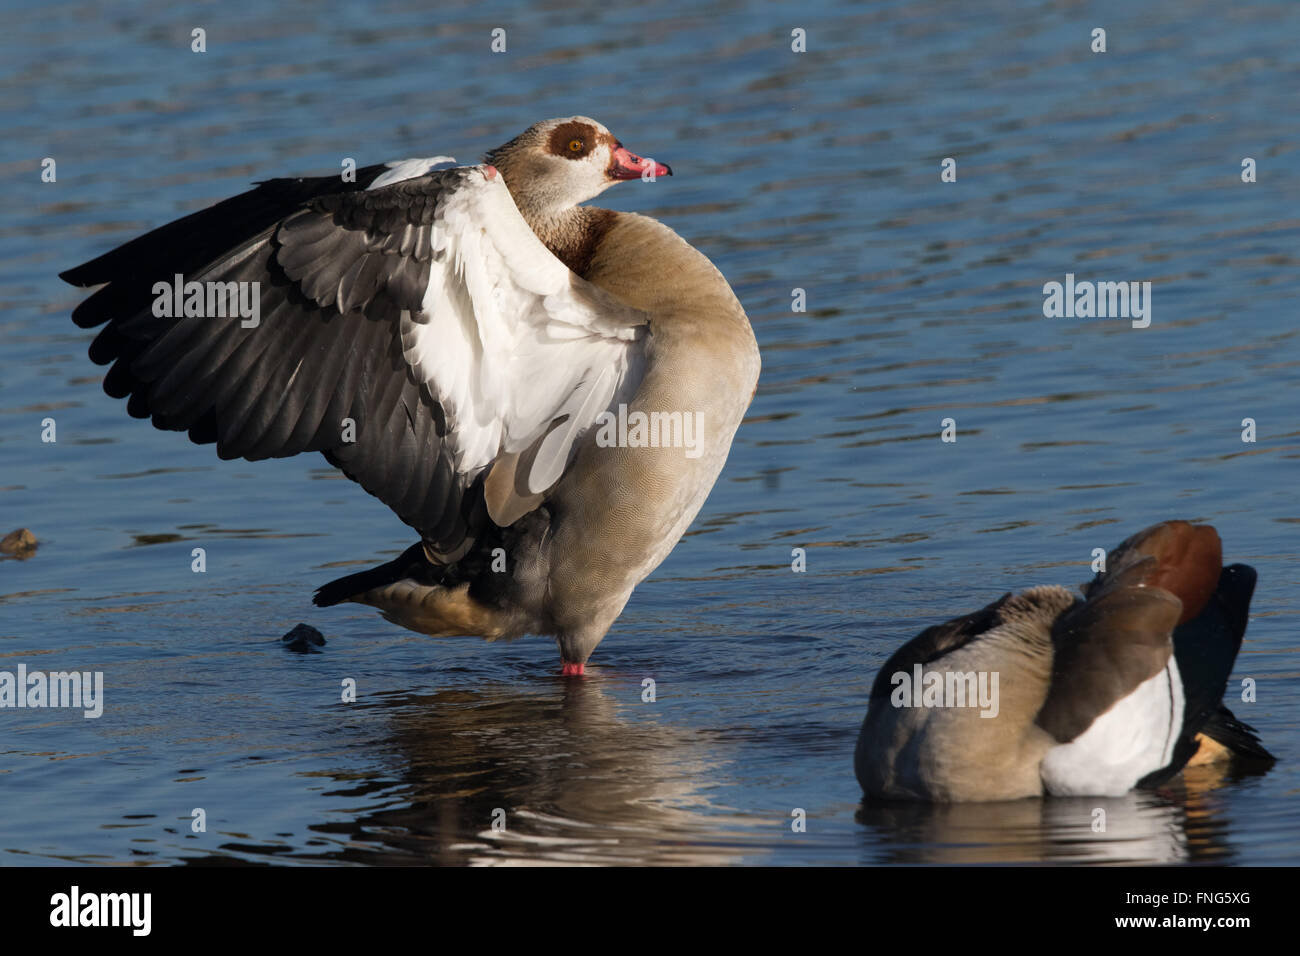 Egyptian Goose (Alopochen aegyptiacus) stretching its wings Stock Photo